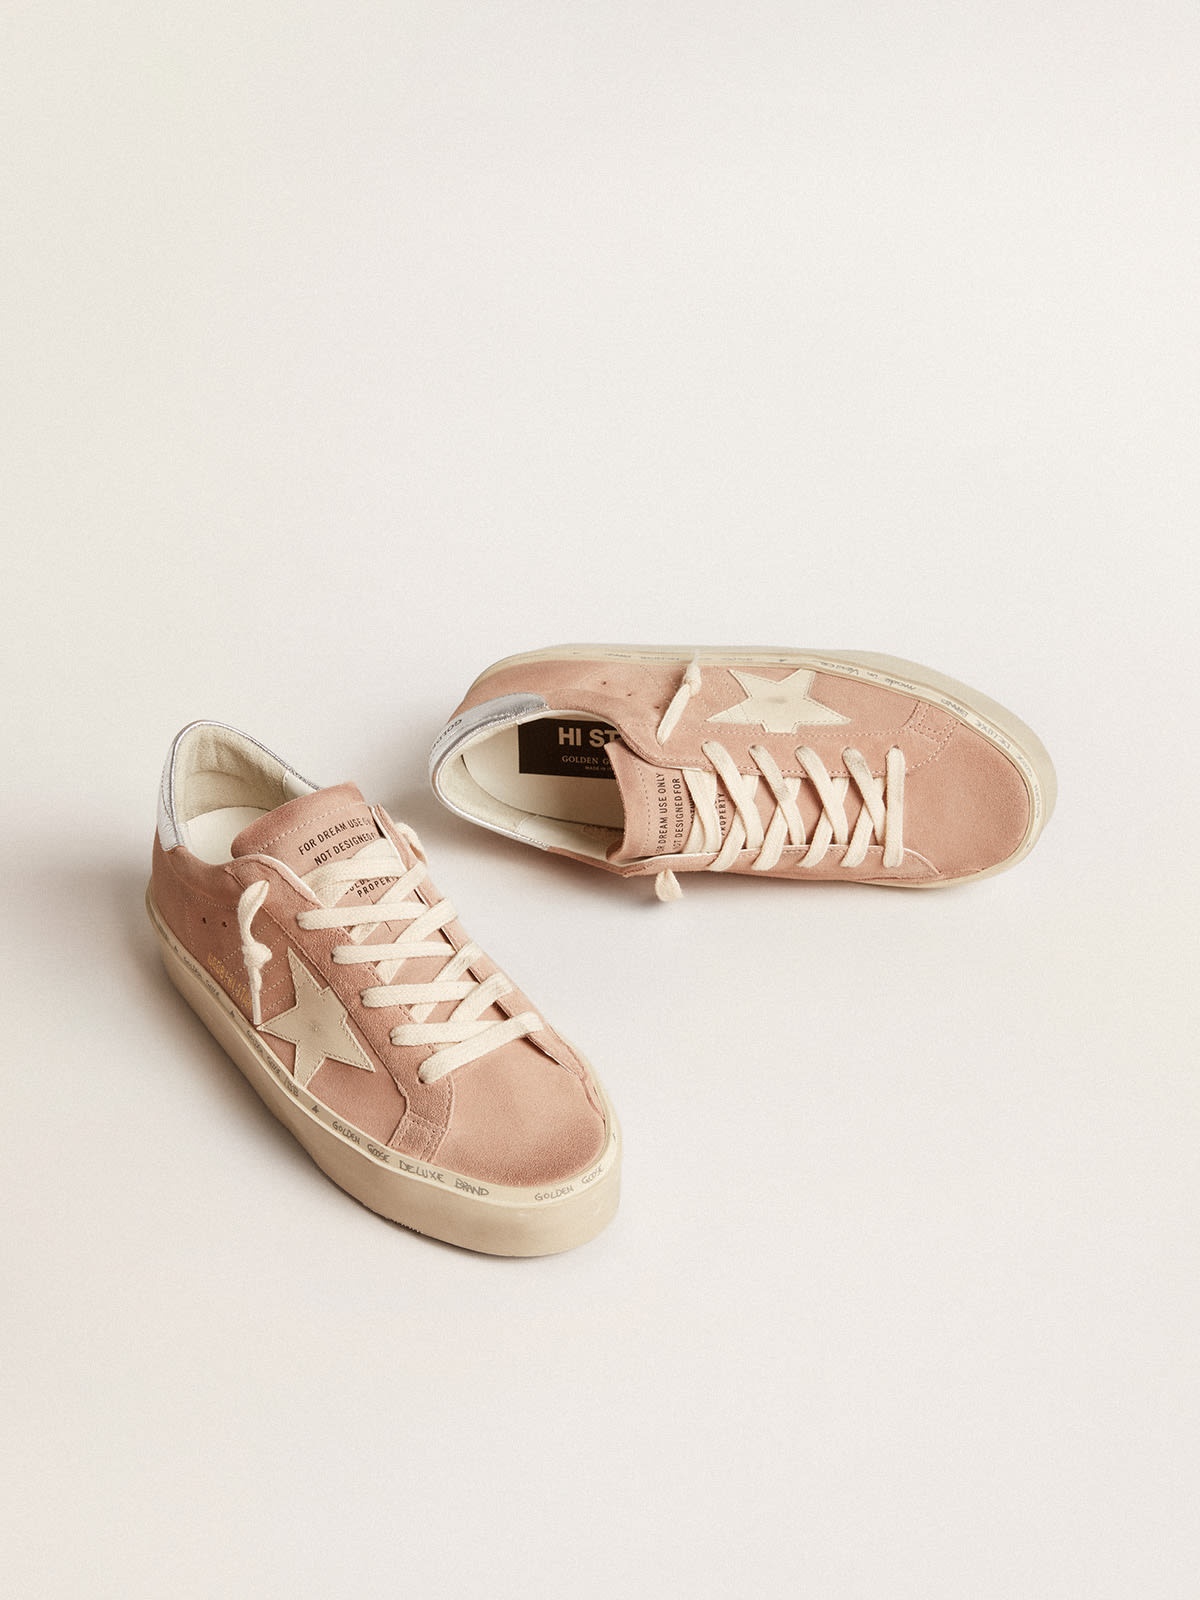 Hi Star in pink suede with cream star and silver leather heel tab - 2